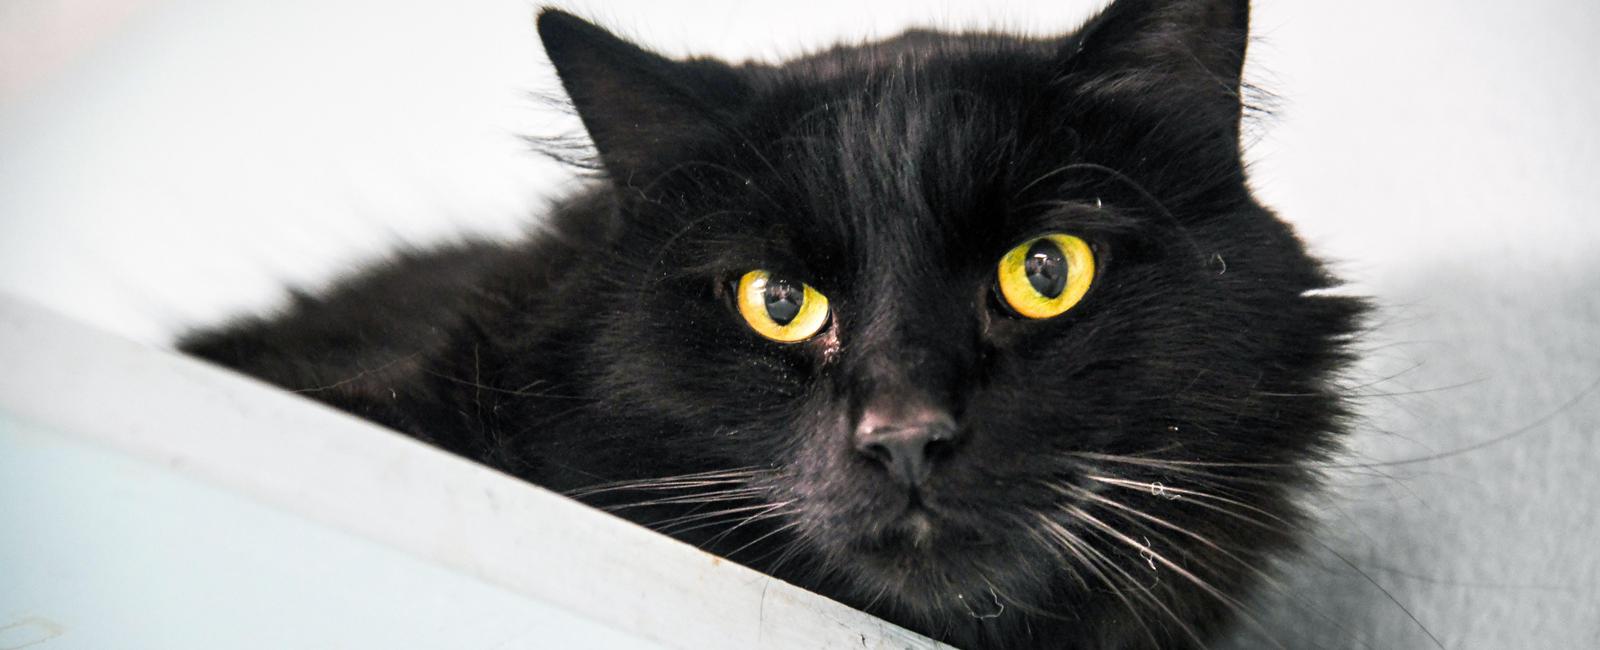 Fearing the animals were in danger from satanic cults animal shelters used to suspend adoptions of black cats in the days leading up to halloween